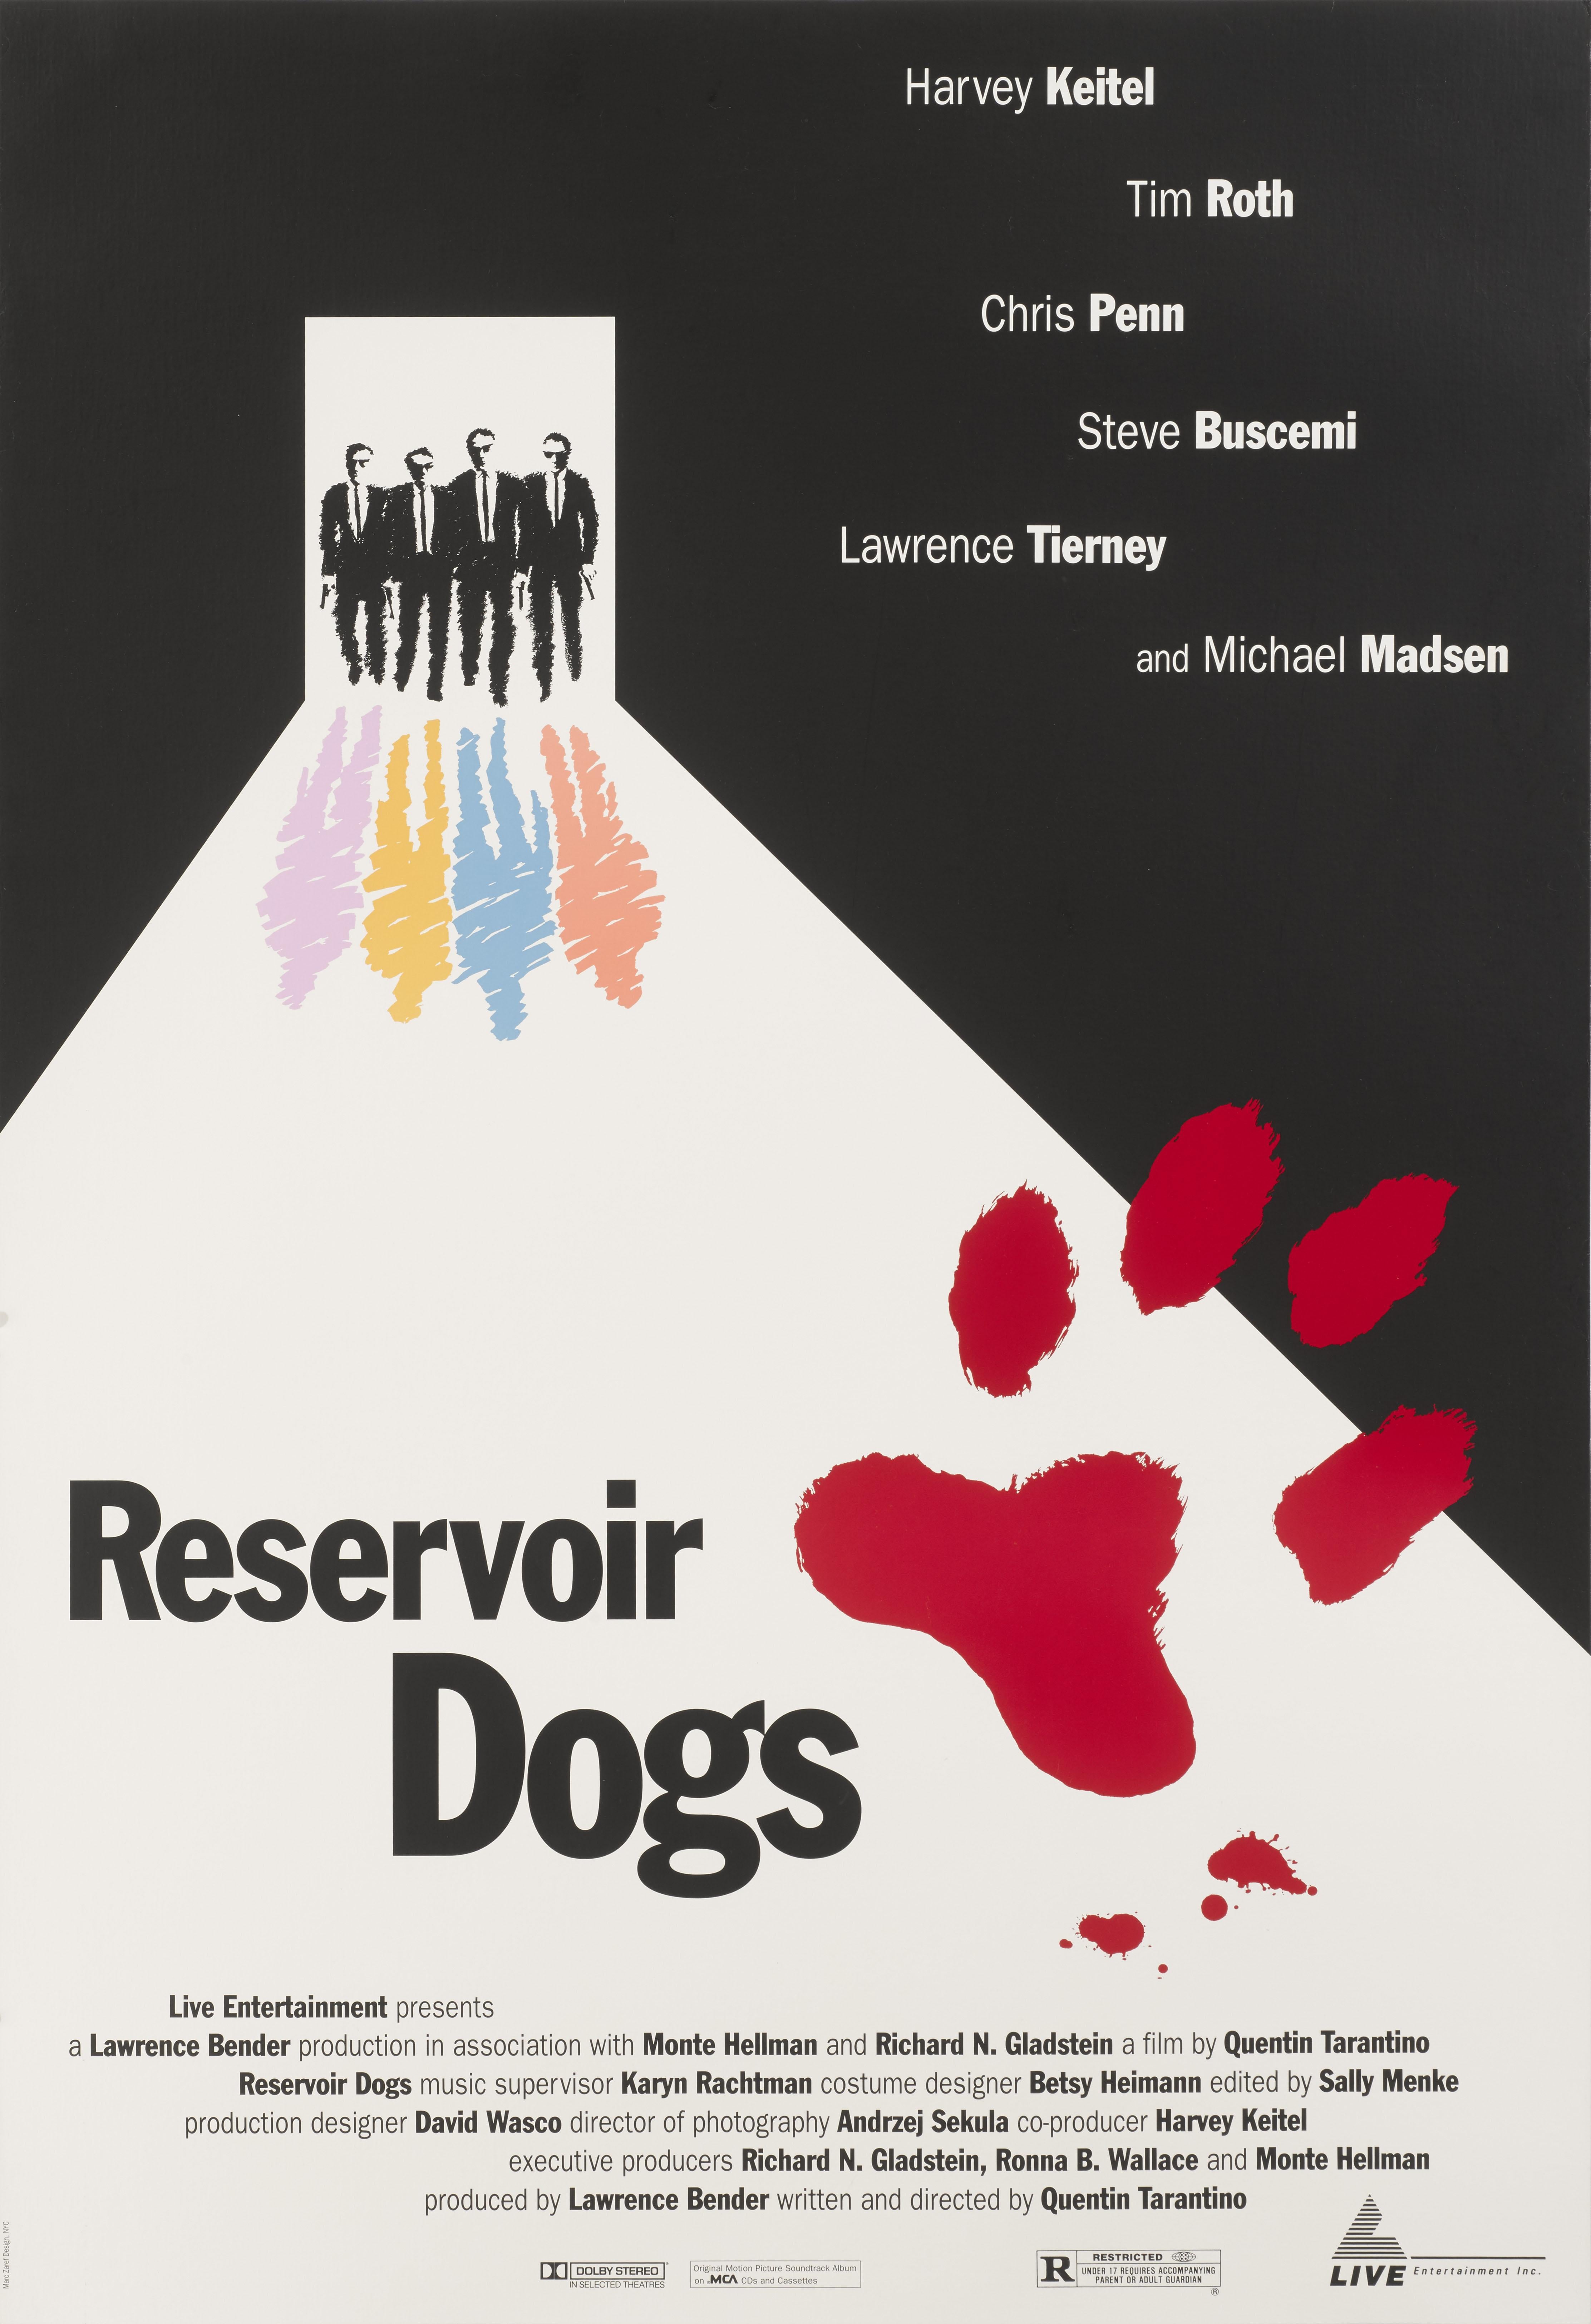 Original US film poster for Quentin Tarantino's fist film Reservoir Dogs. This poster was designed for use at the Cannes Film Festival in 1992. 
The artwork was only used for the Cannes Film Festival and is very different to the regular US